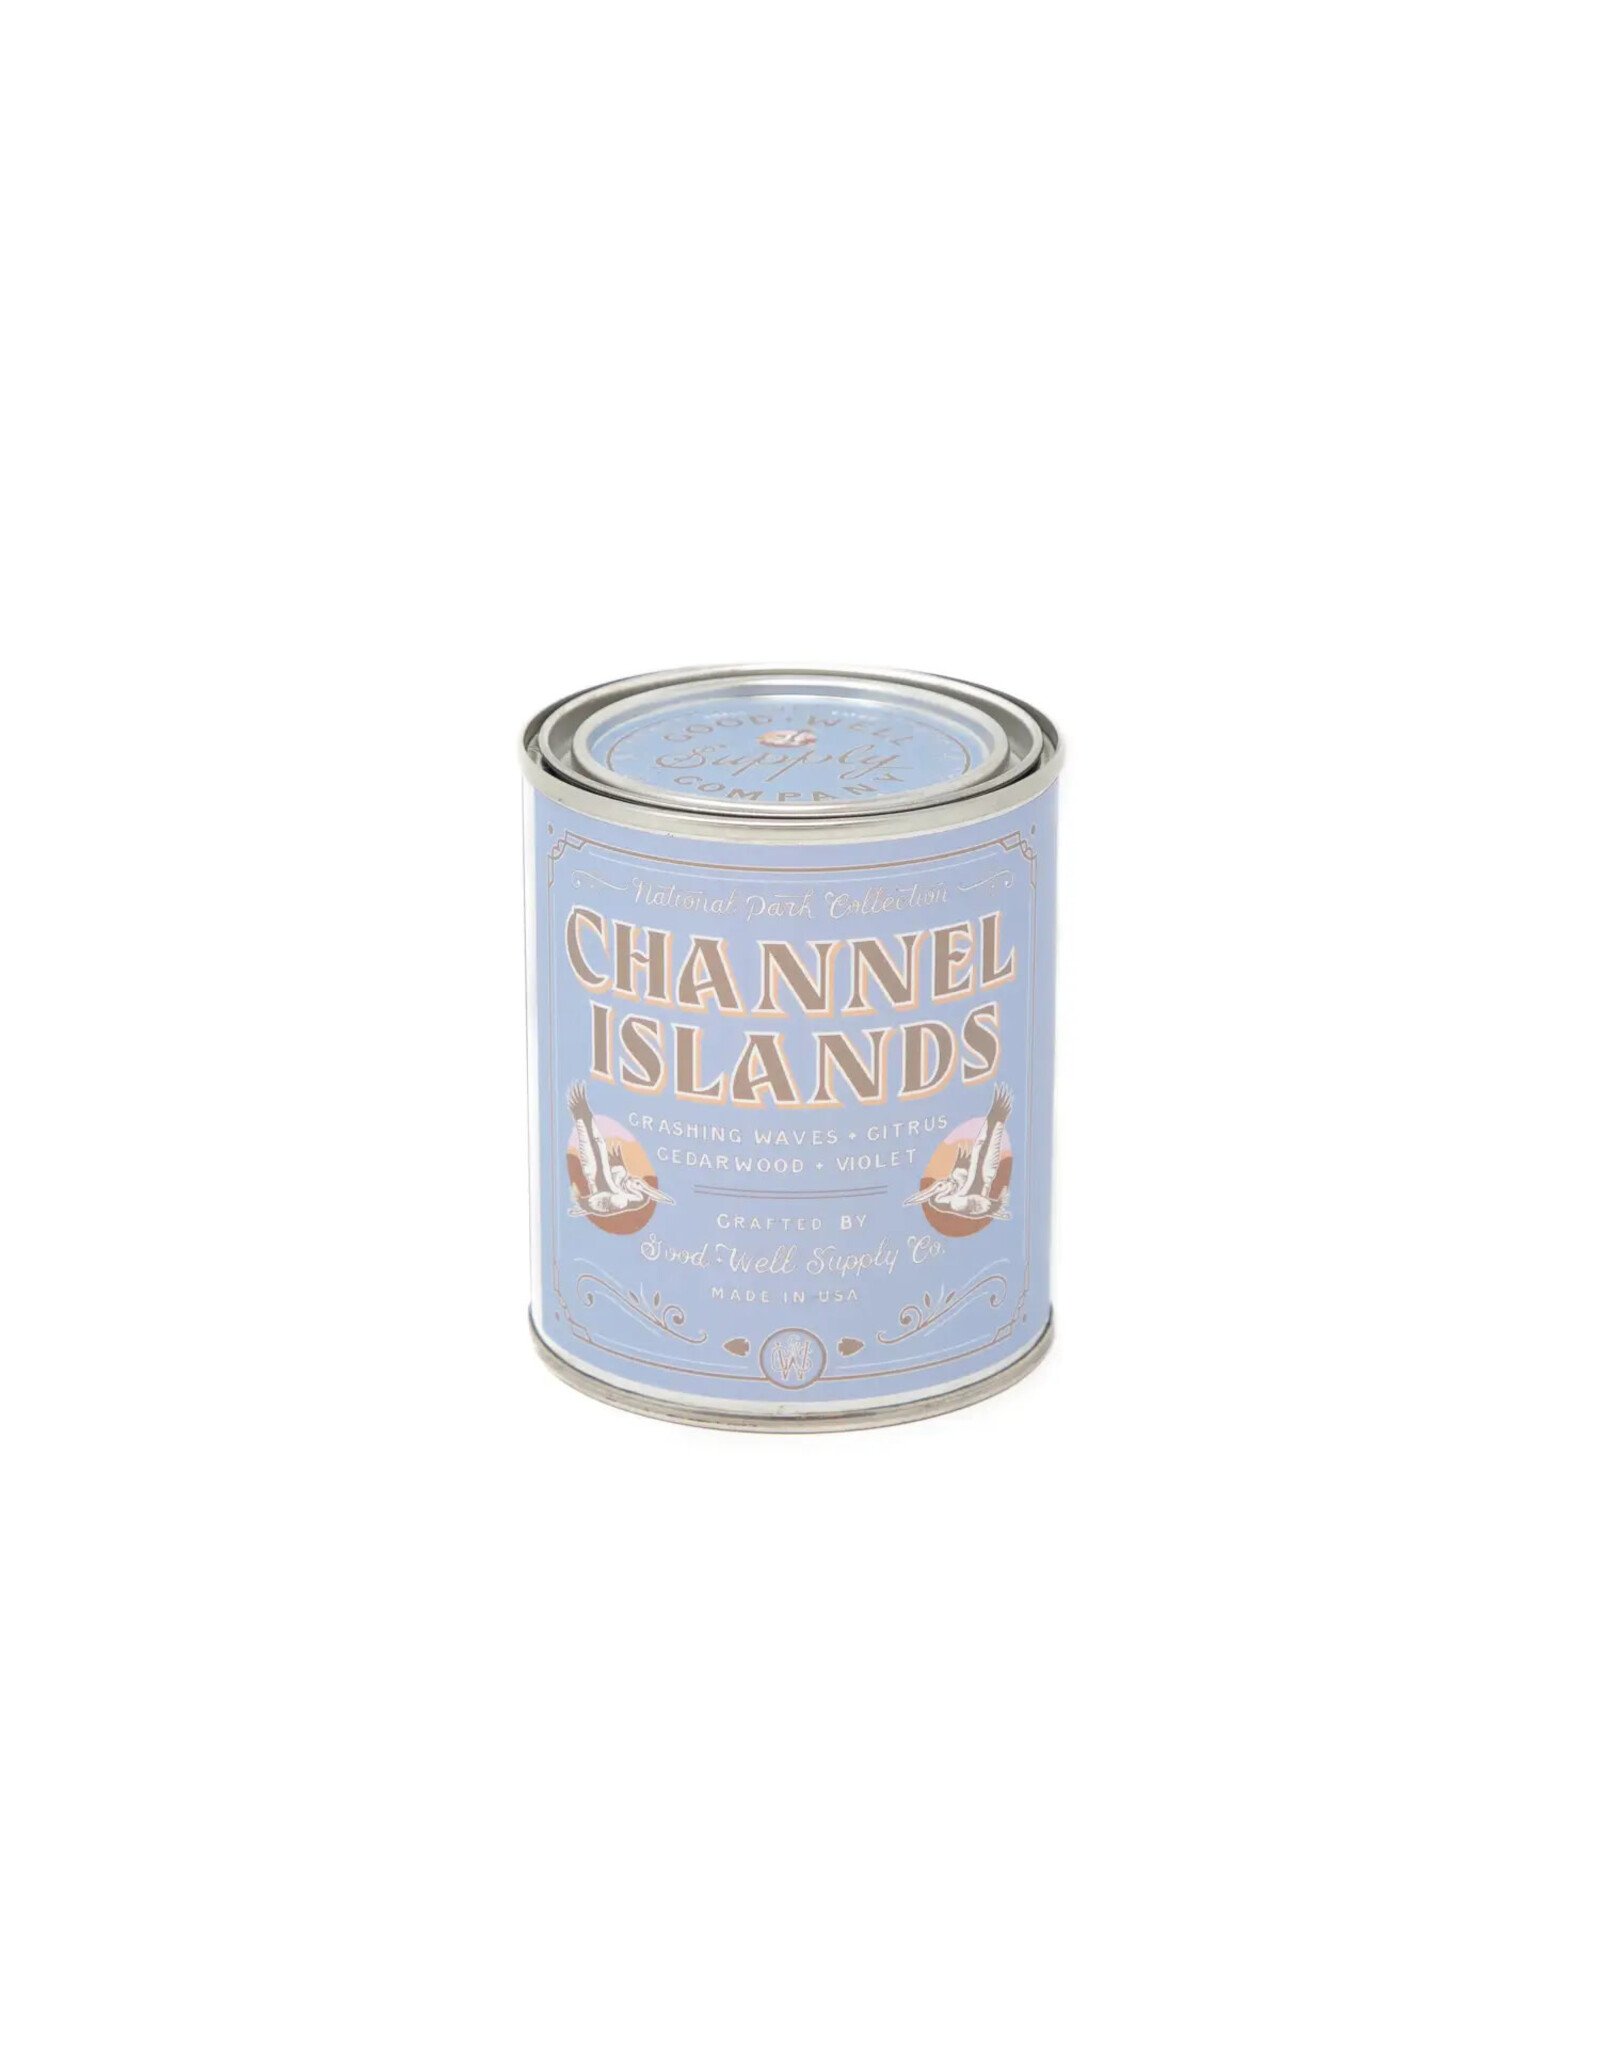 Good & Well Supply Co. Half-Pint Channel Islands Candle - Citrus, Cedarwood & Violet